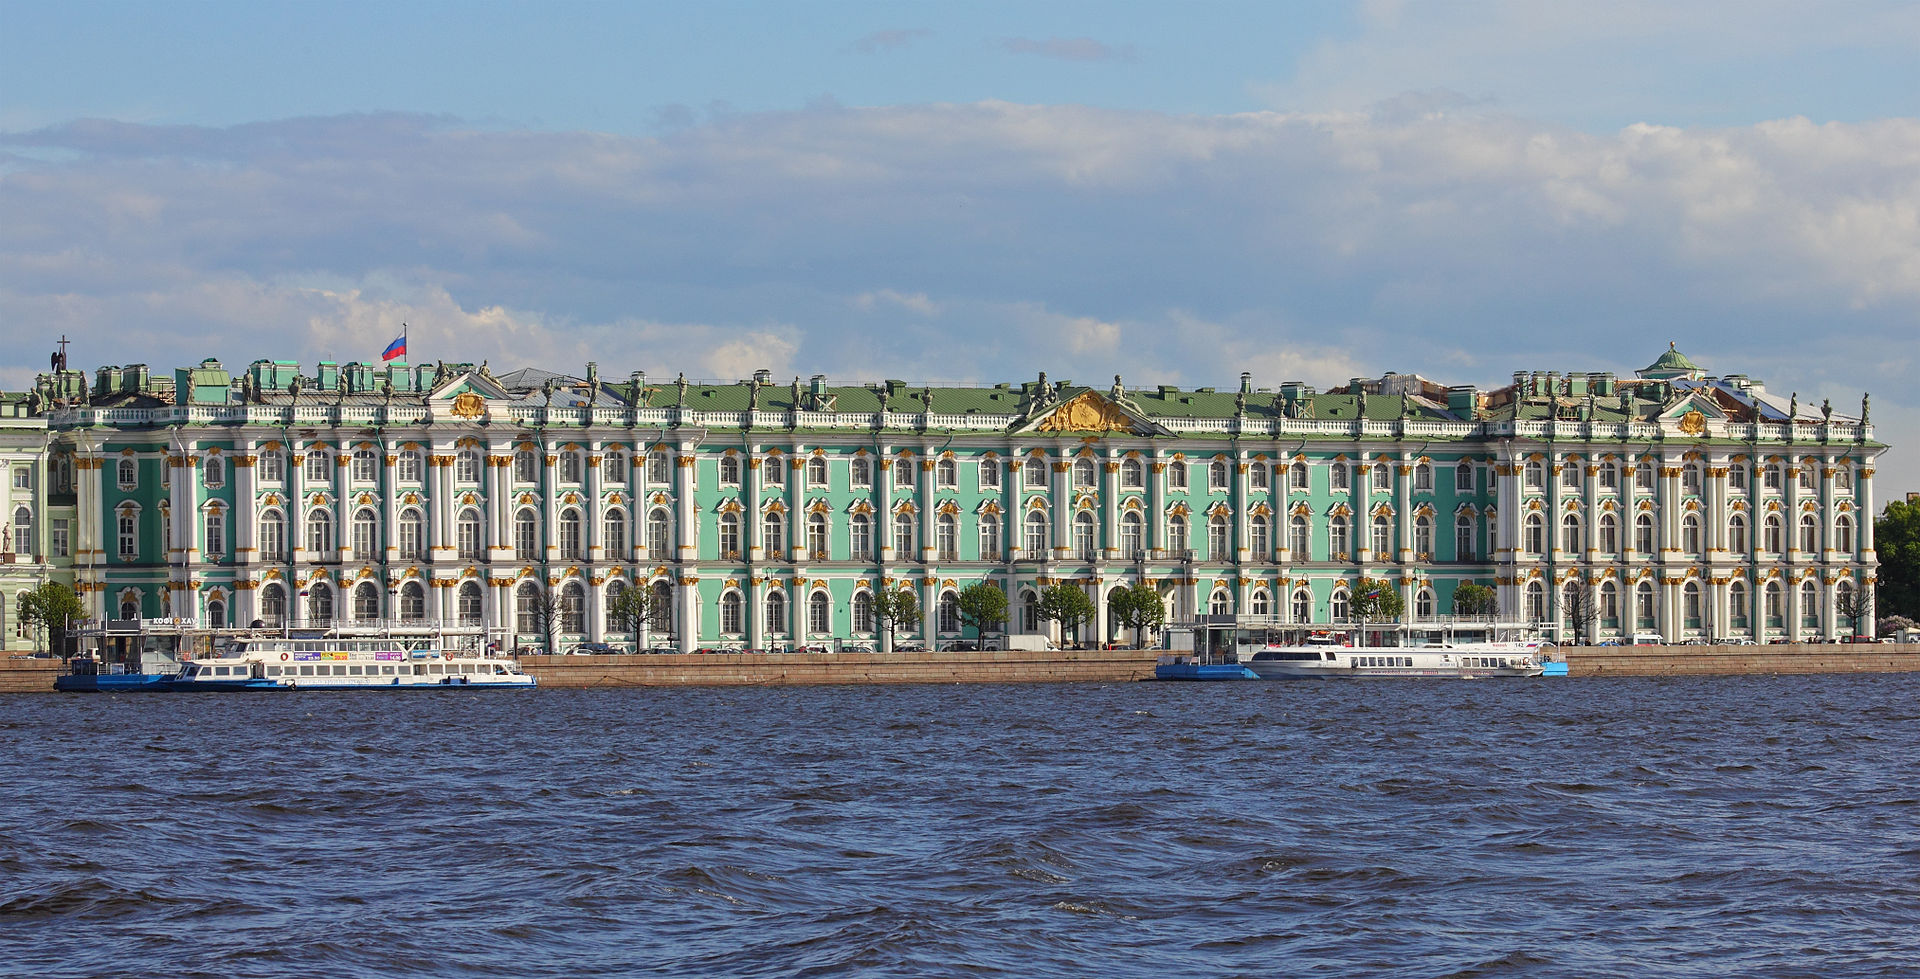 The main building of the Hermitage Museum in St. Petersburg, Russia (Image: A.Savin via Wikimedia Commons)